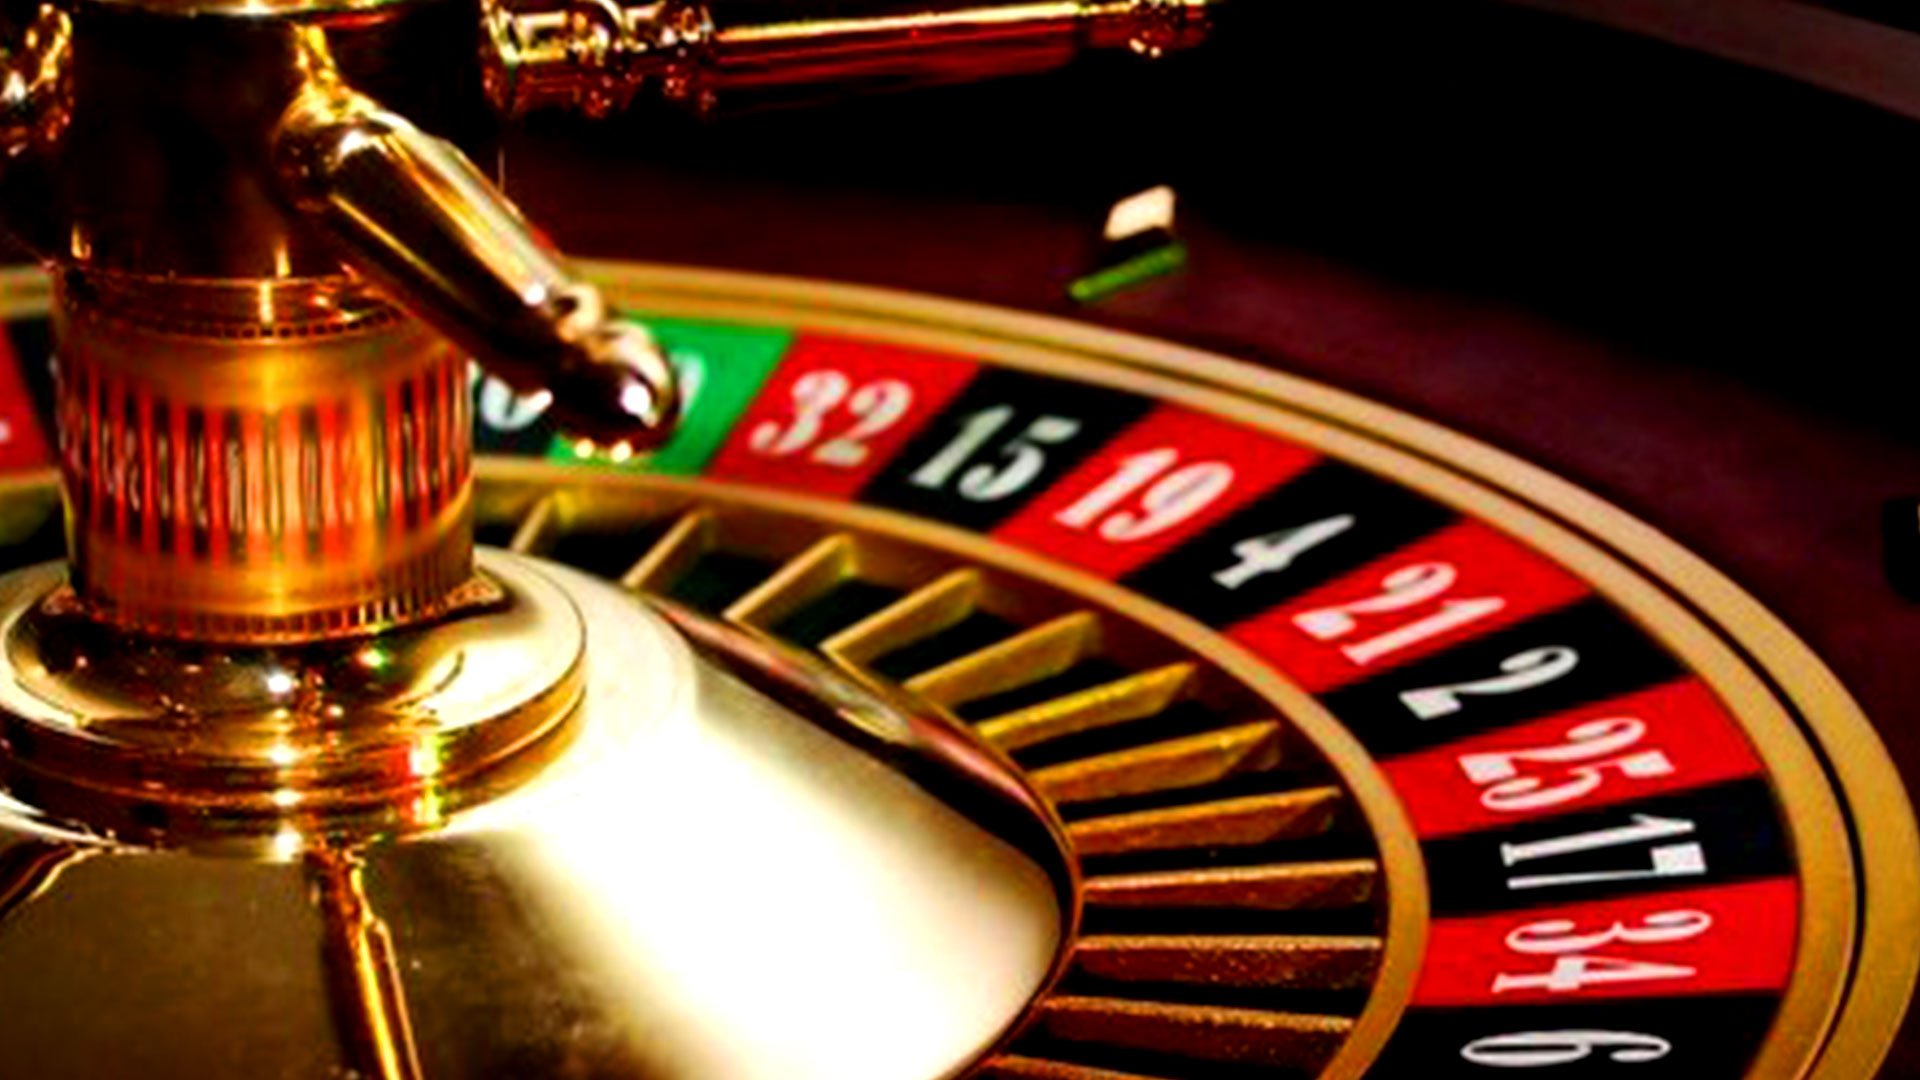 Game hight resolution background American Roulette